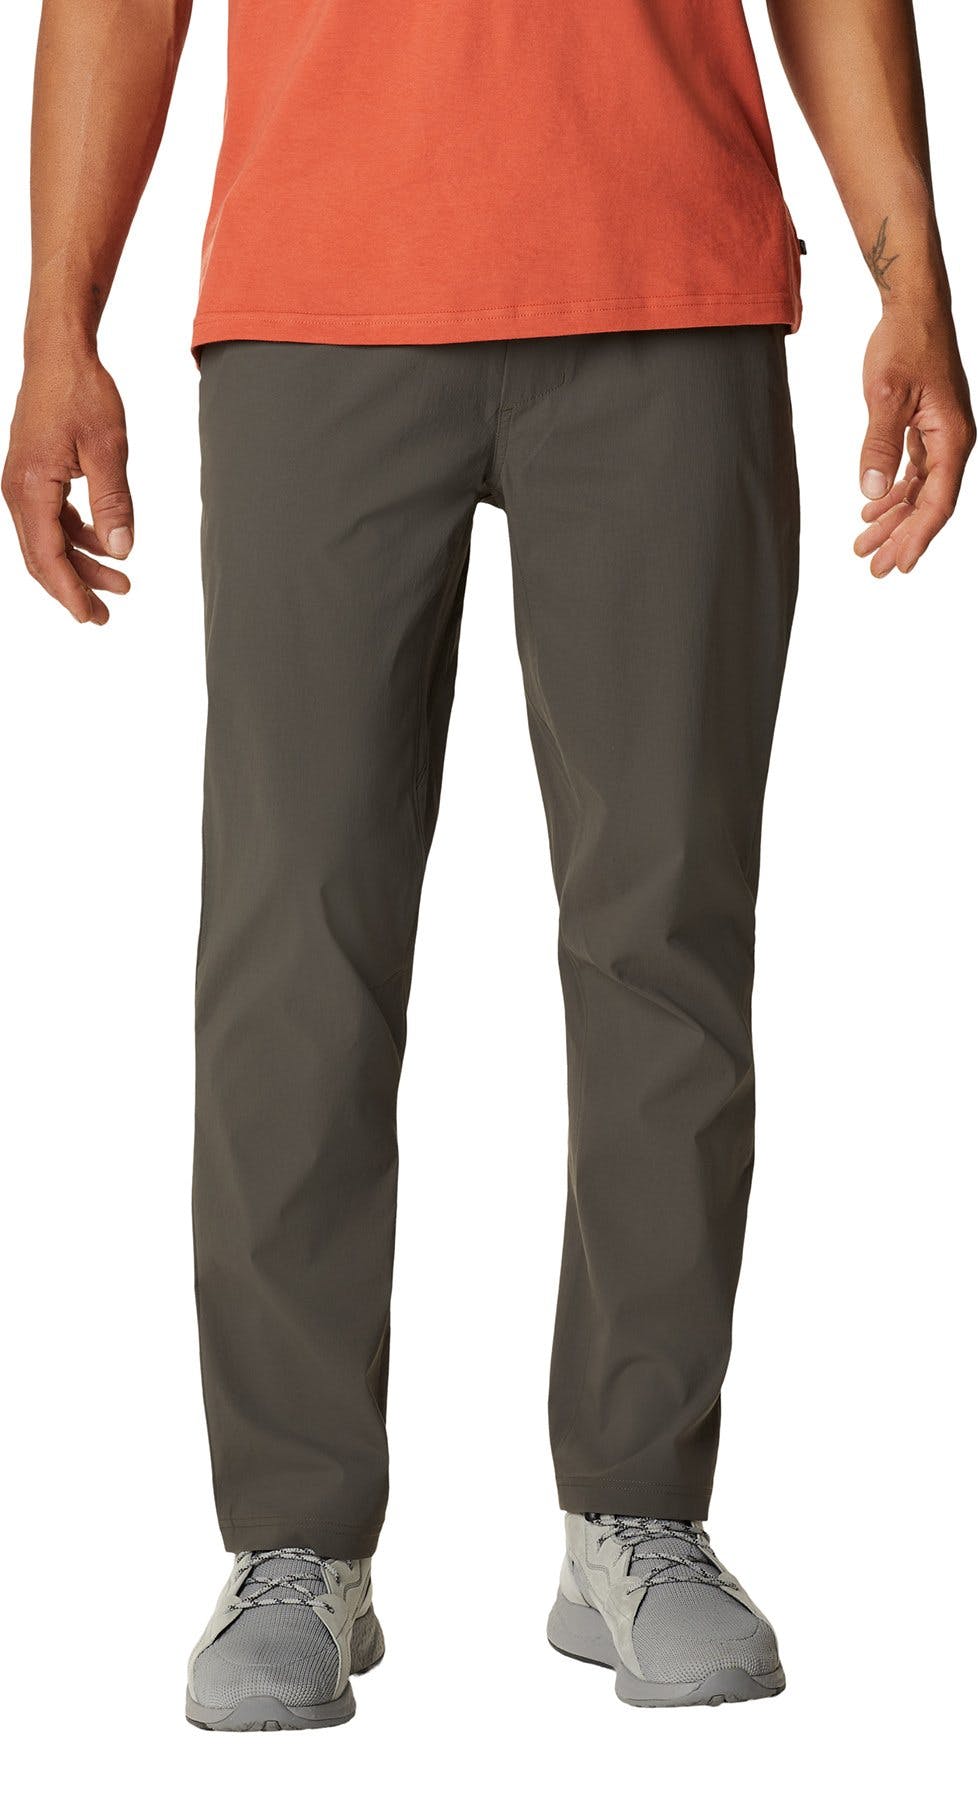 Product image for Basin™ Pull-On Pant - Men's